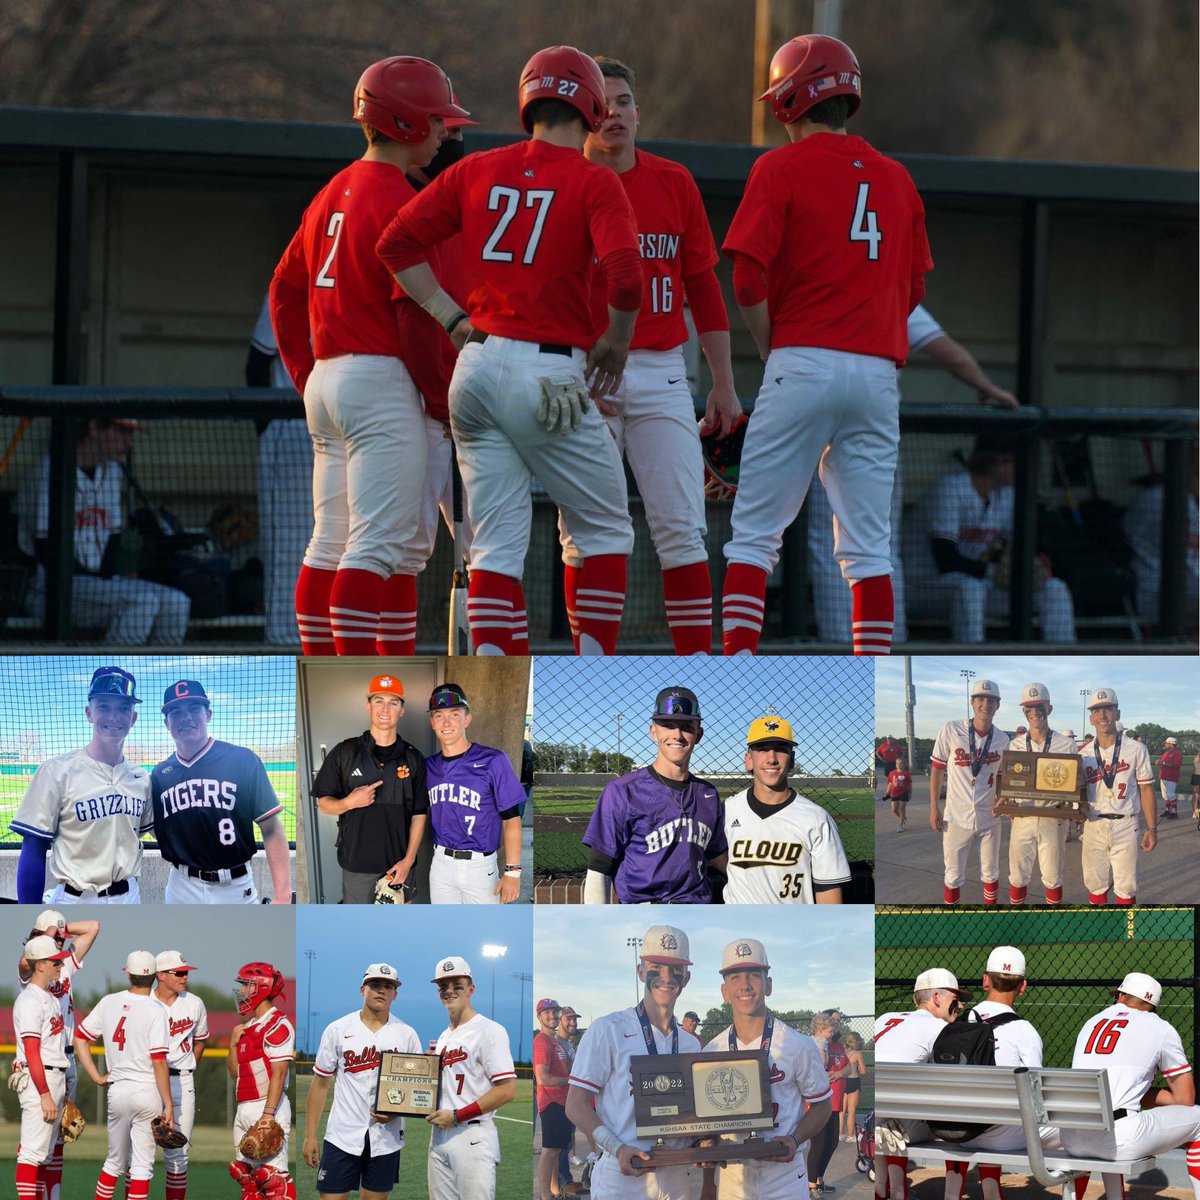 @BullPupBaseball Alum’s!! Being able to compete against these guys in Juco now is a blessing. All the countless hours of hard work and memories we have made together I wouldn’t trade for the world. Love you fellas. @AlvordHunter @dawsonfeil2 @jaret_myers04 @CoachGerst